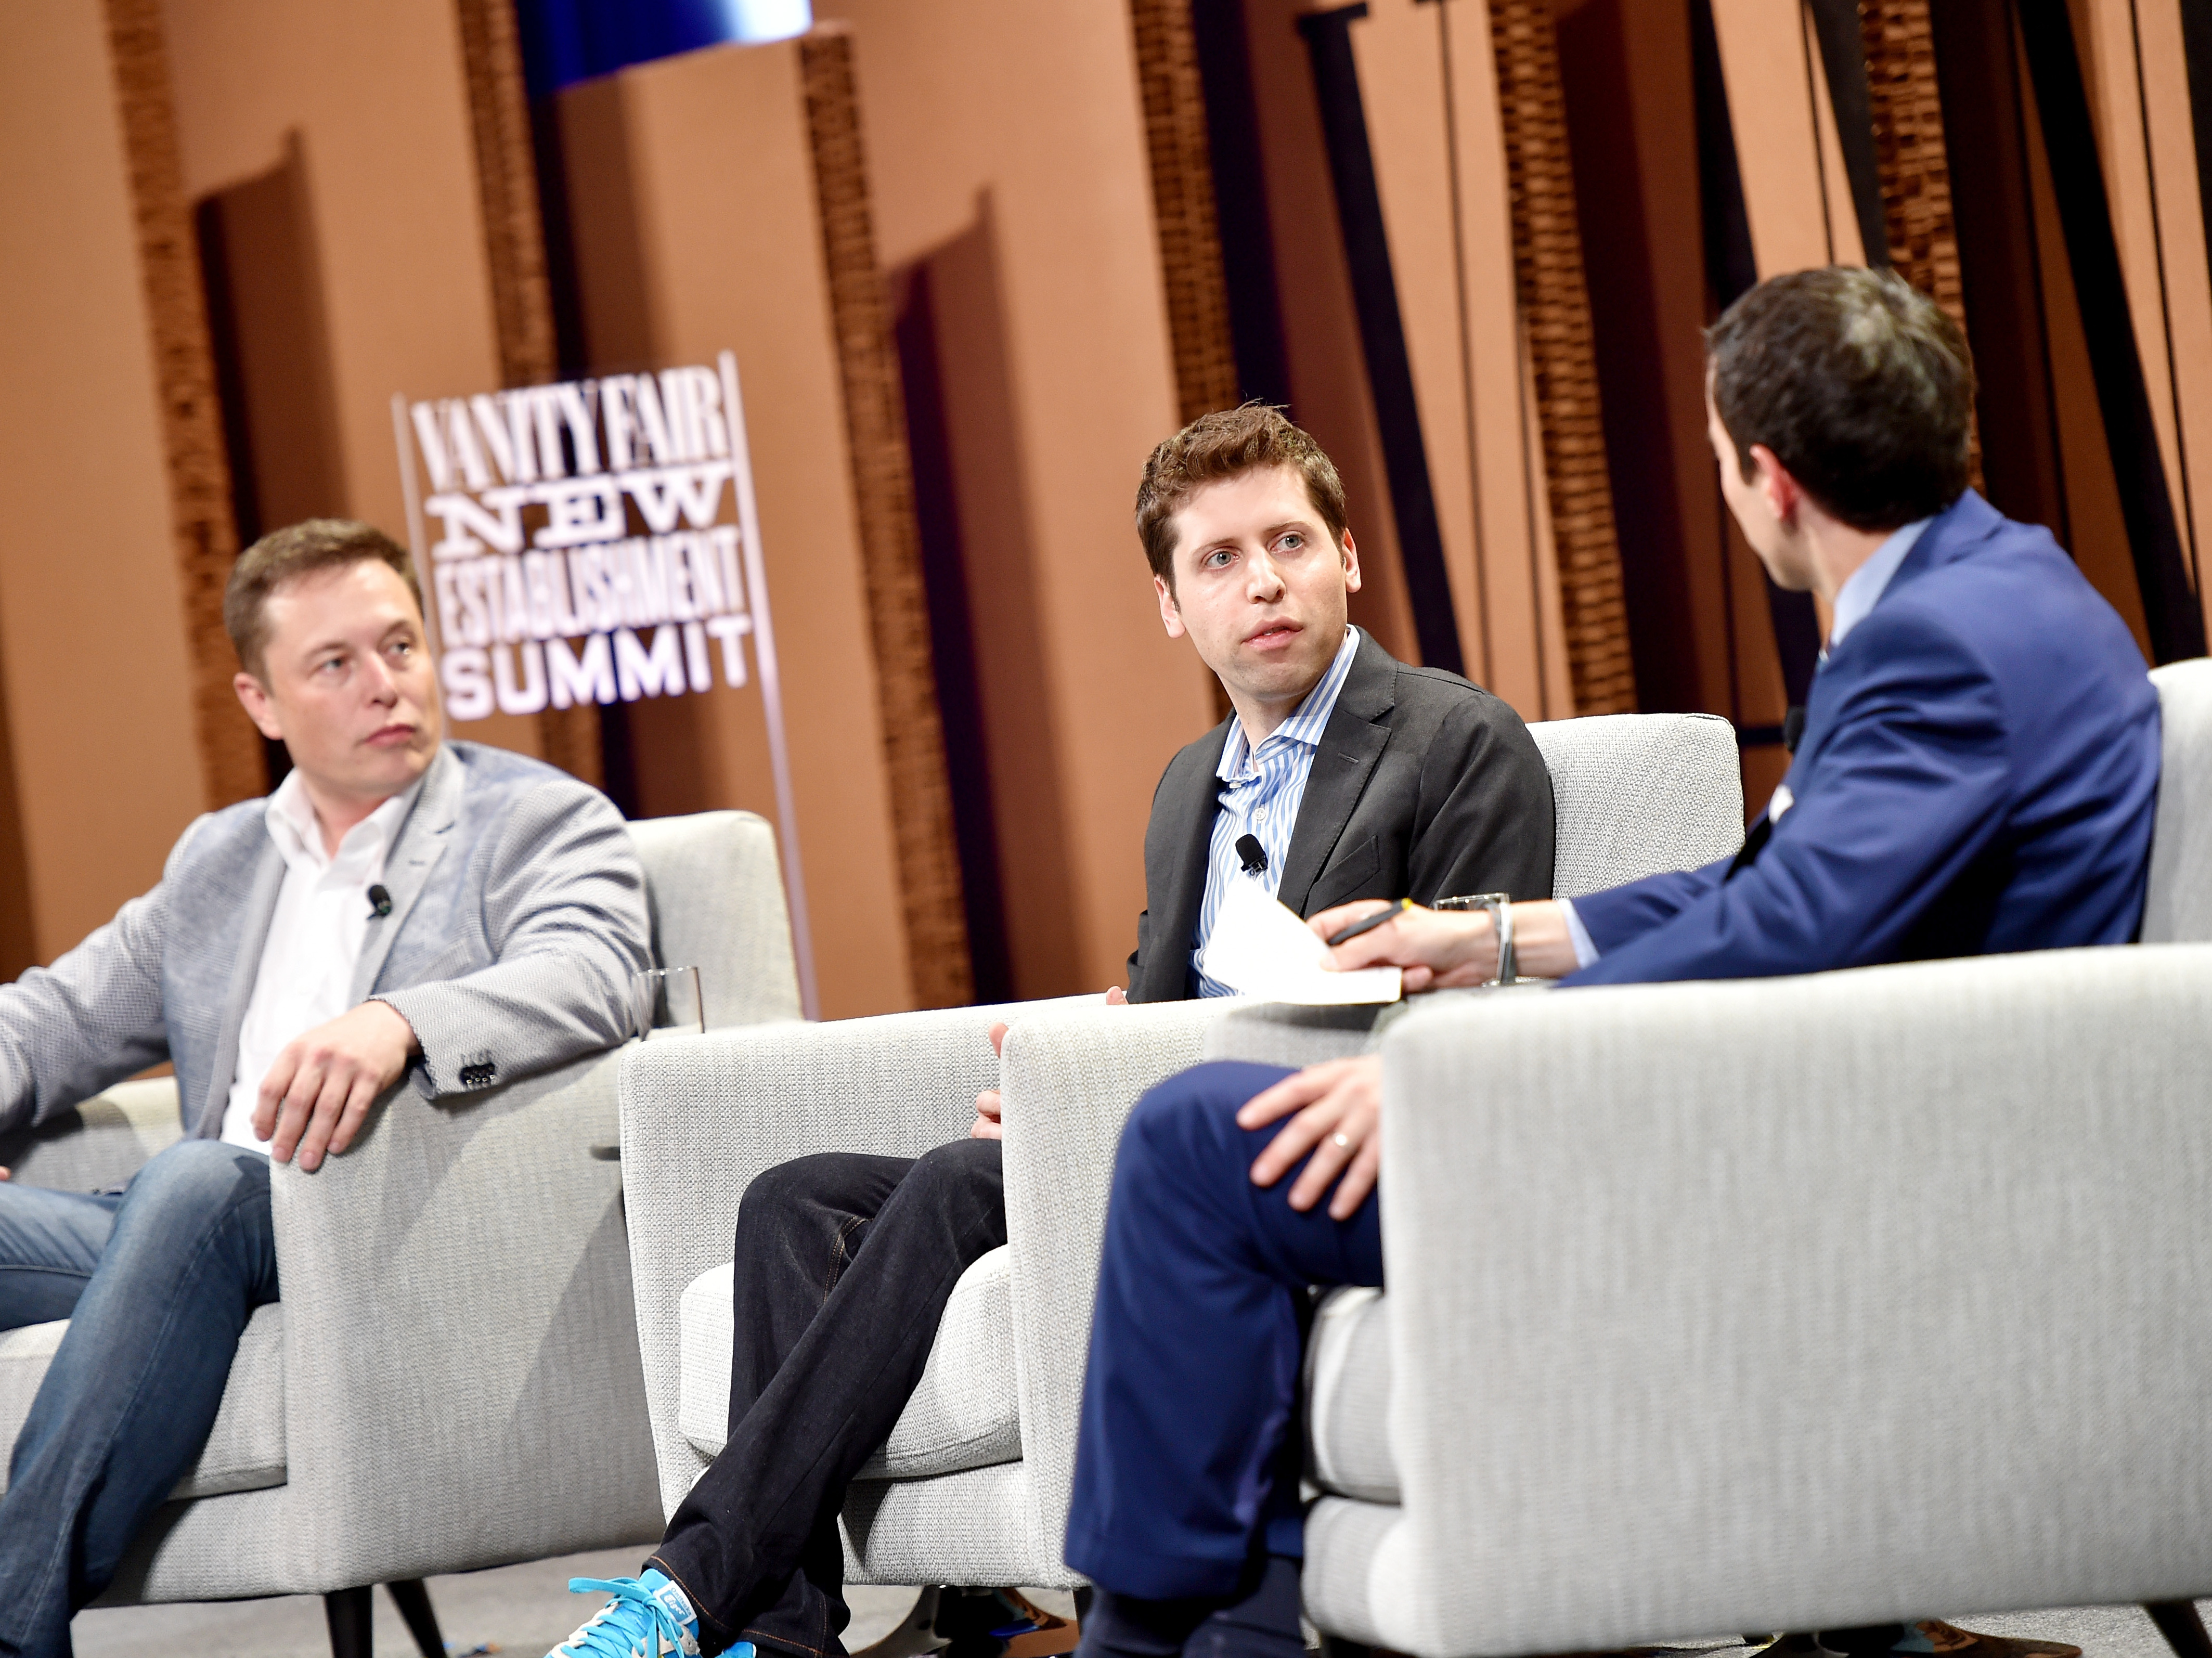 From left, Elon Musk, Sam Altman and Andrew Ross Sorkin, <em>New York Times</em> financial columnist, speak during the Vanity Fair New Establishment Summit at Yerba Buena Center for the Arts on Oct. 6, 2015, in San Francisco.’/></p>
<p>A former co-chair of OpenAI, Musk says he invested millions in the AI lab on “false promises” that it would be nonprofit and open-source. OpenAI is now backed by Microsoft.</p>
<p>(Image credit: Mike Windle)</p>
<p><img src=